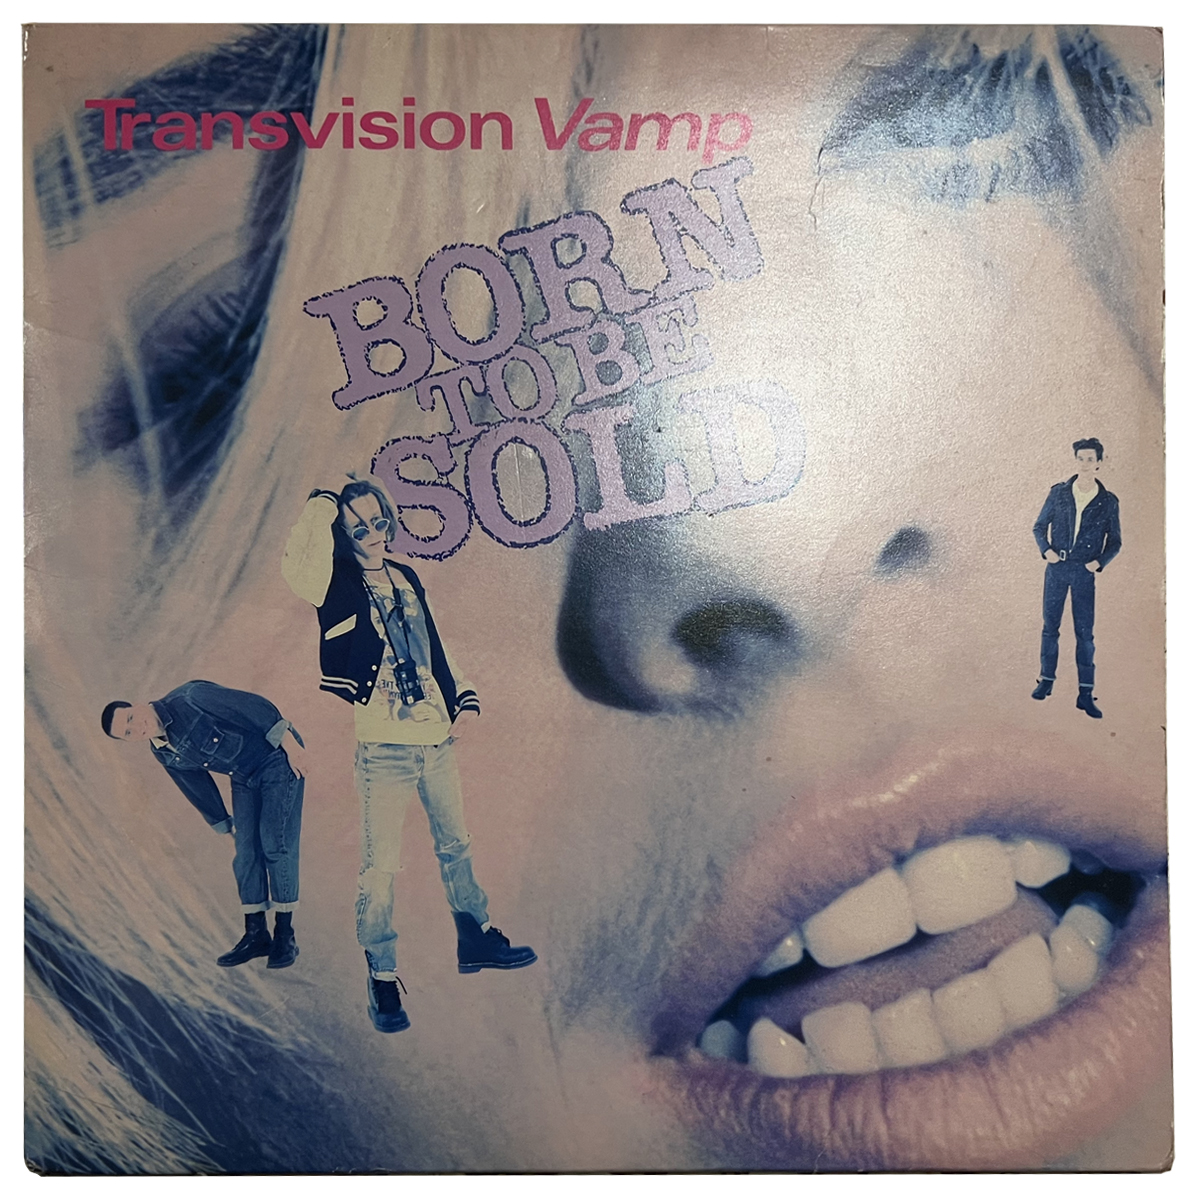 TRANSVISION VAMP ‘BORN TO BE SOLD’ MAXI SINGLE 12” VINYL 1989 *SIGNED & PERSONALIZED